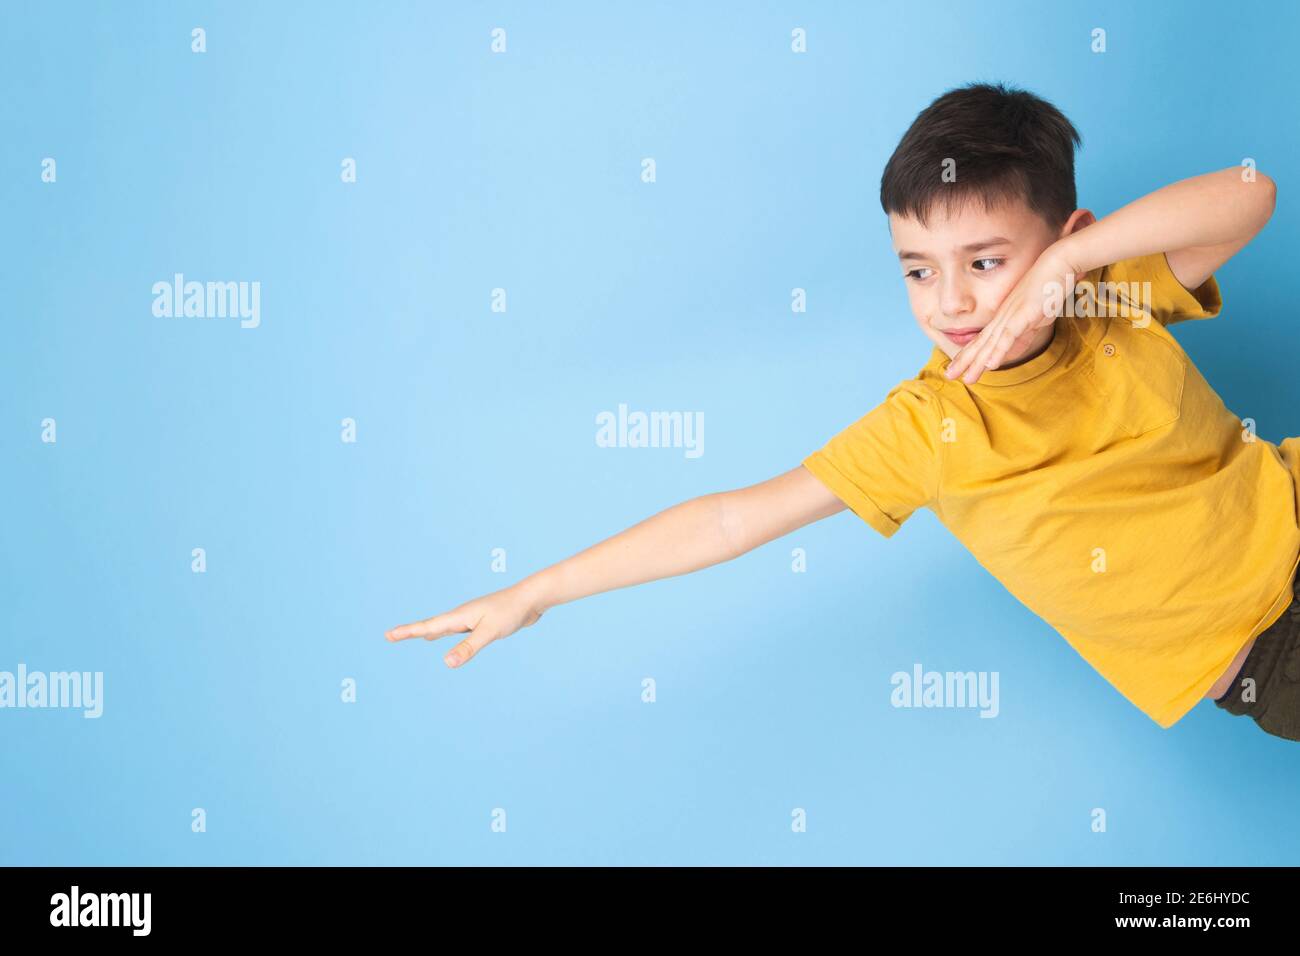 a child imagines flying through the sky Stock Photo